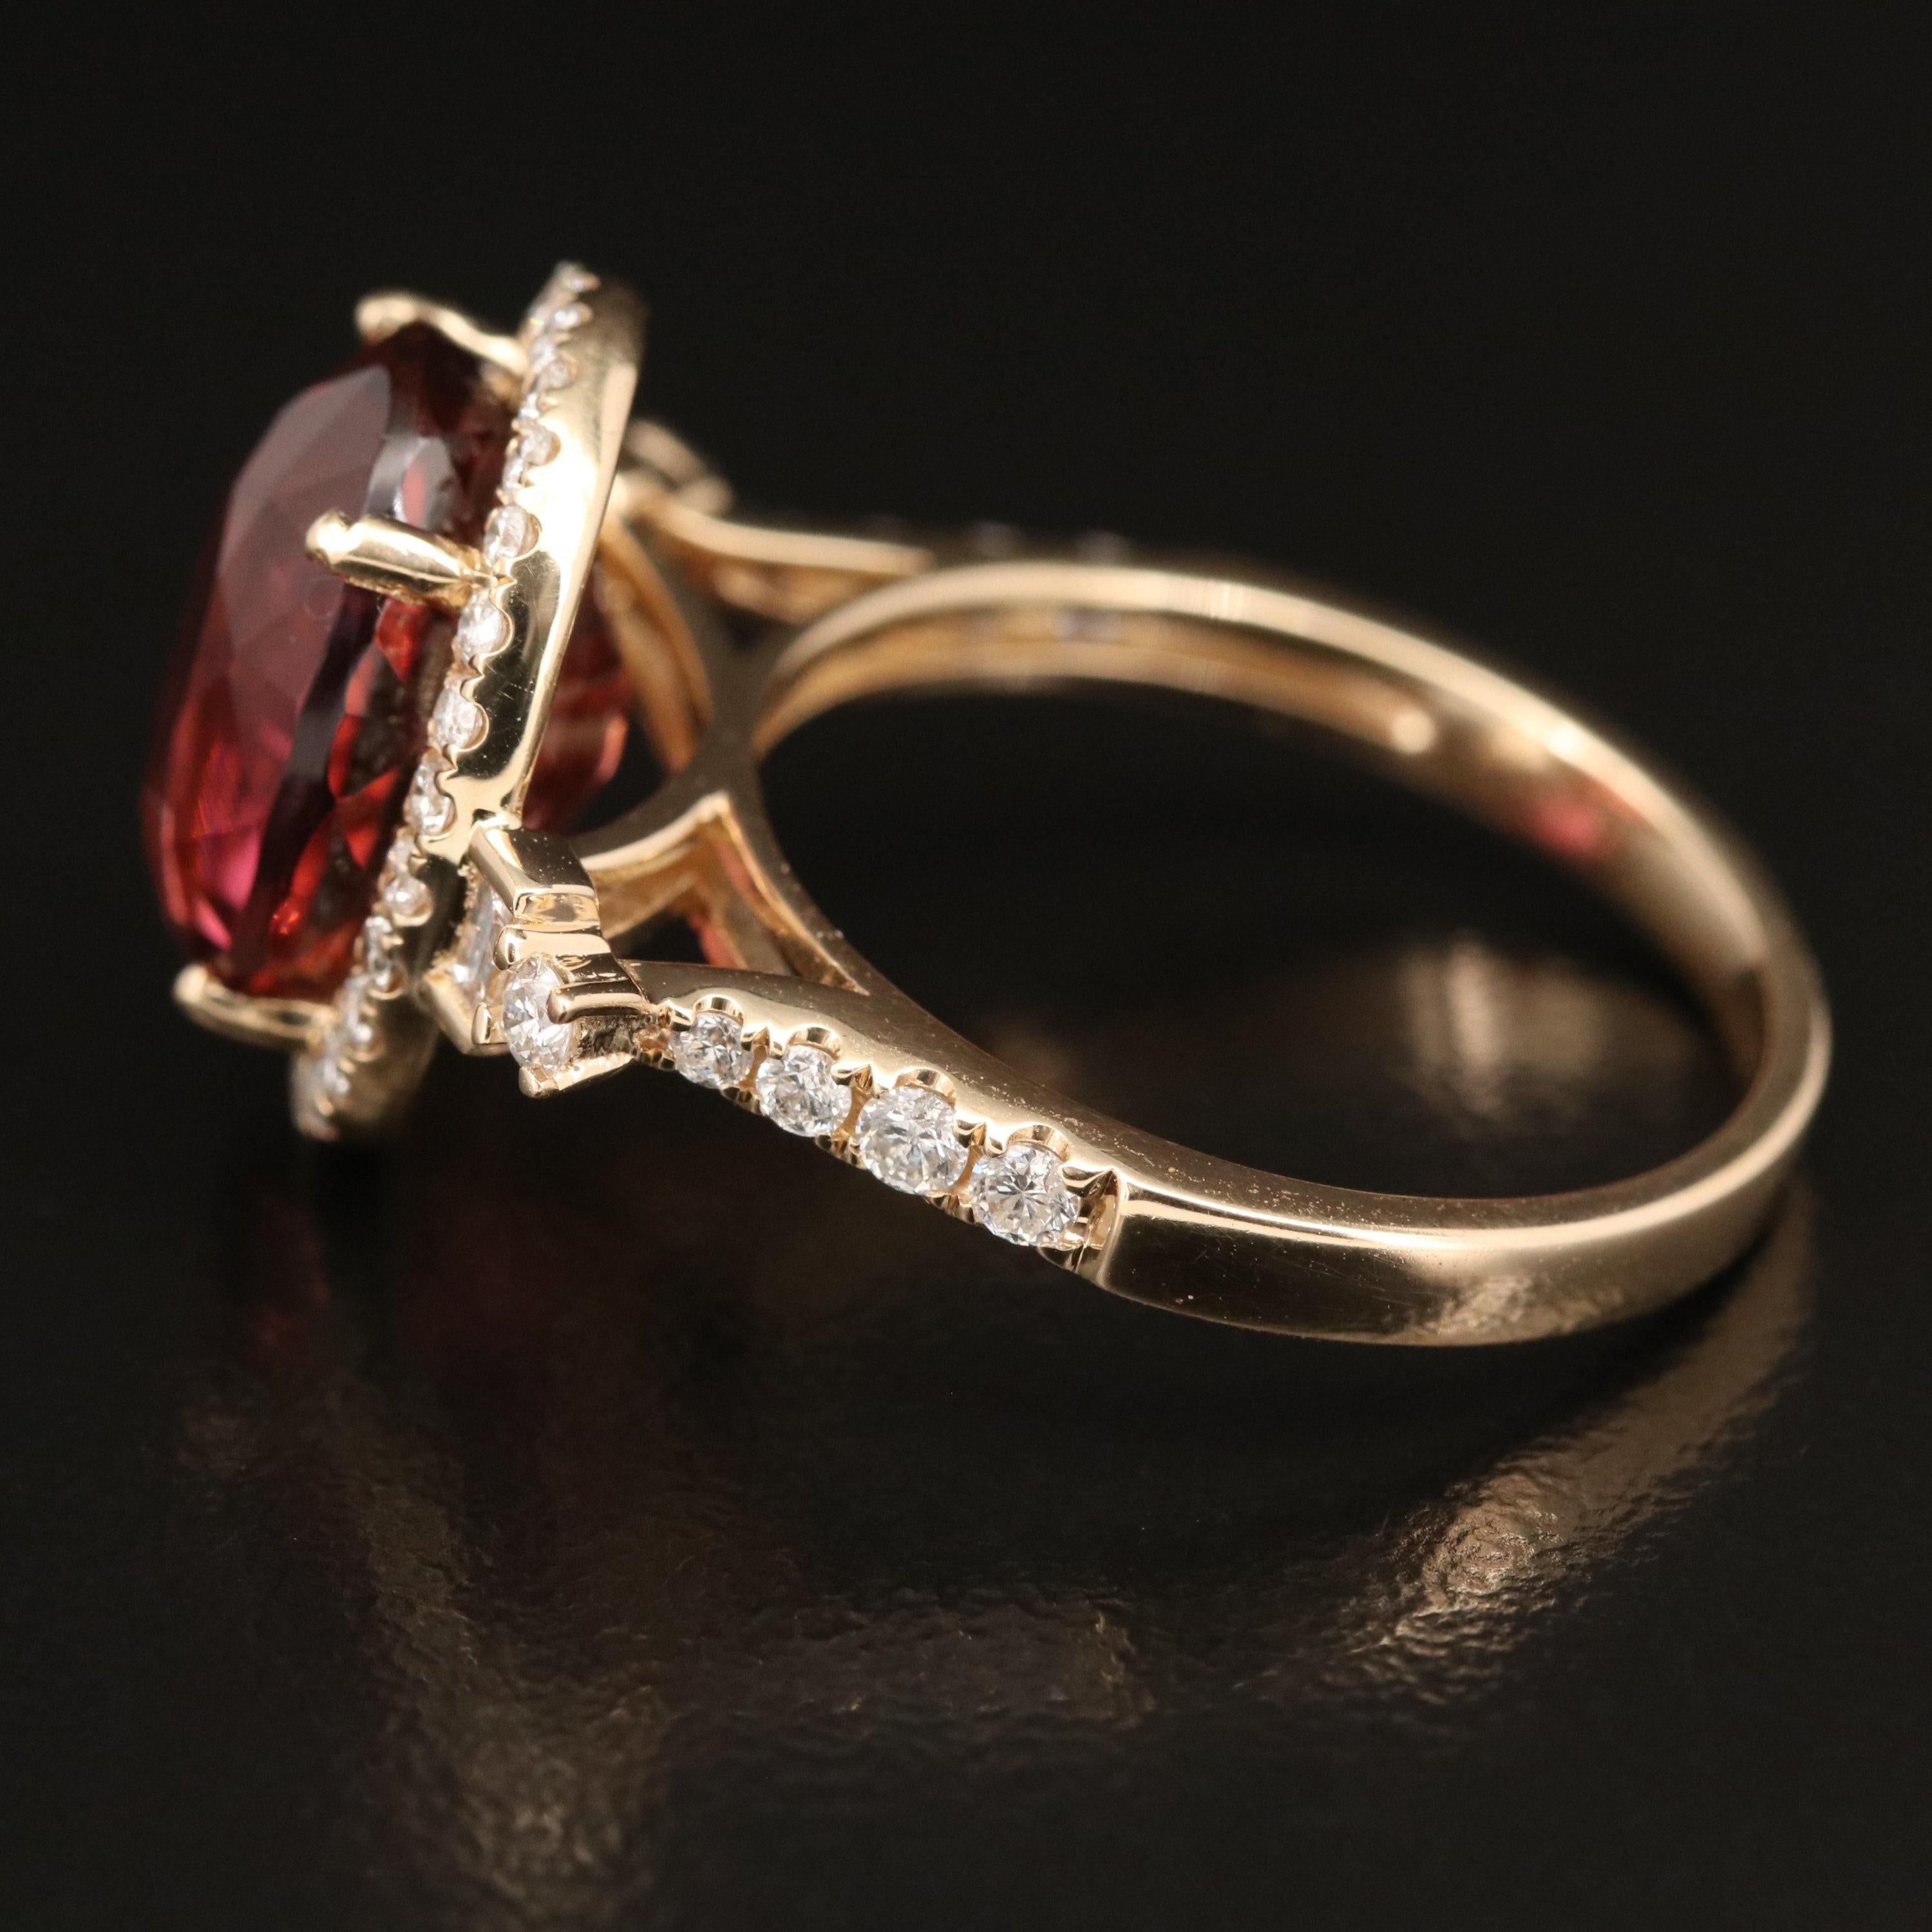 For Sale:  6.3 Carat Oval Cut Rubellite Tourmaline Bridal Promise Ring Halo Tourmaline Ring 5